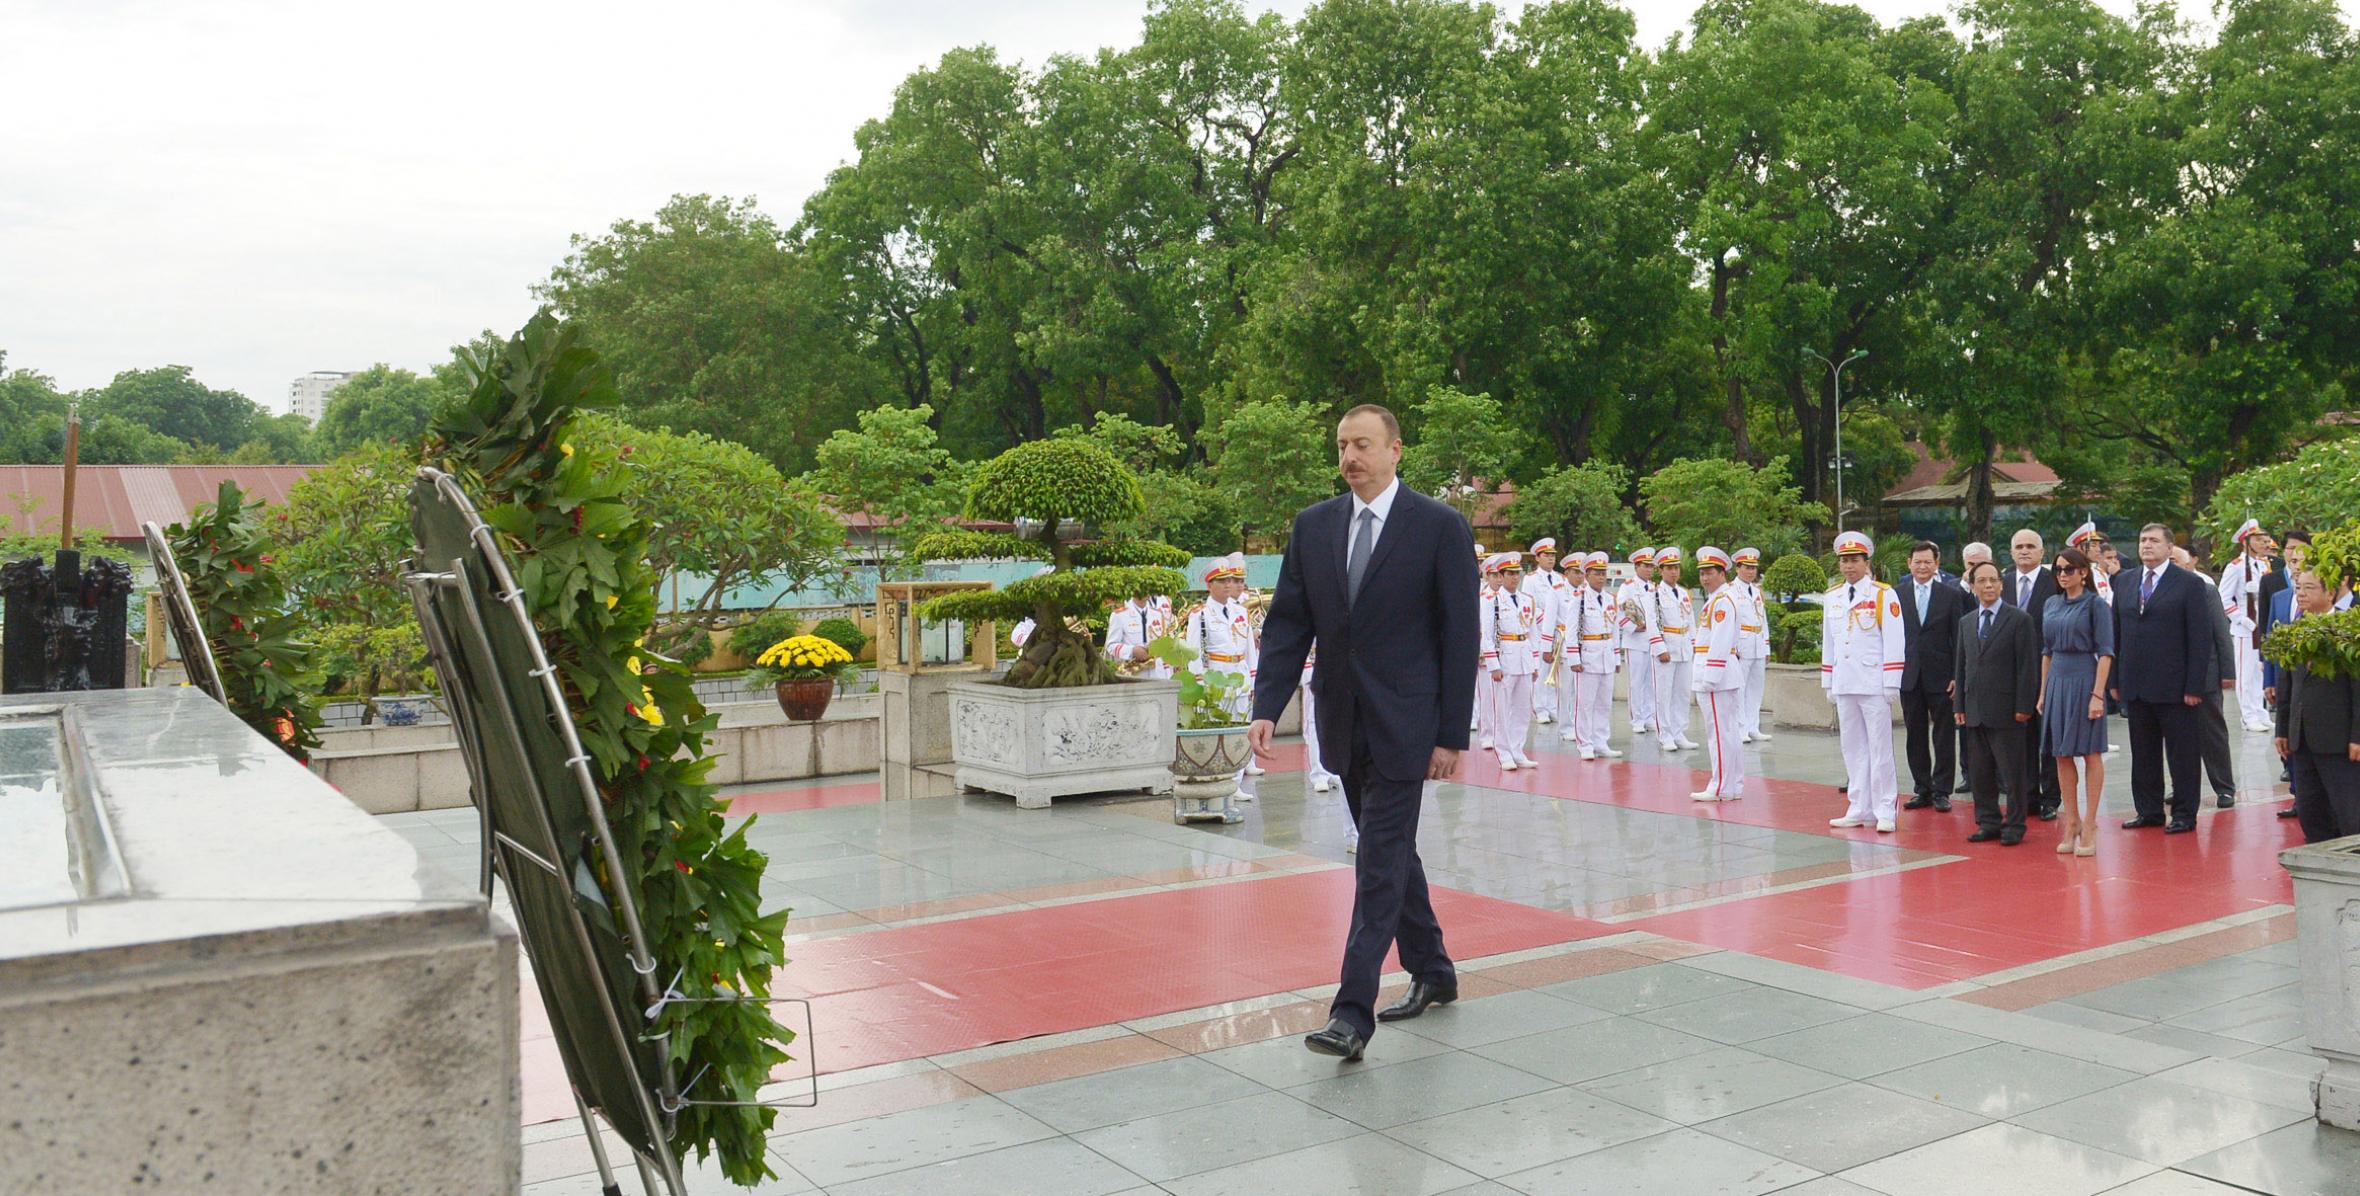 Ilham Aliyev visited the monument to a national hero and martyr in Hanoi